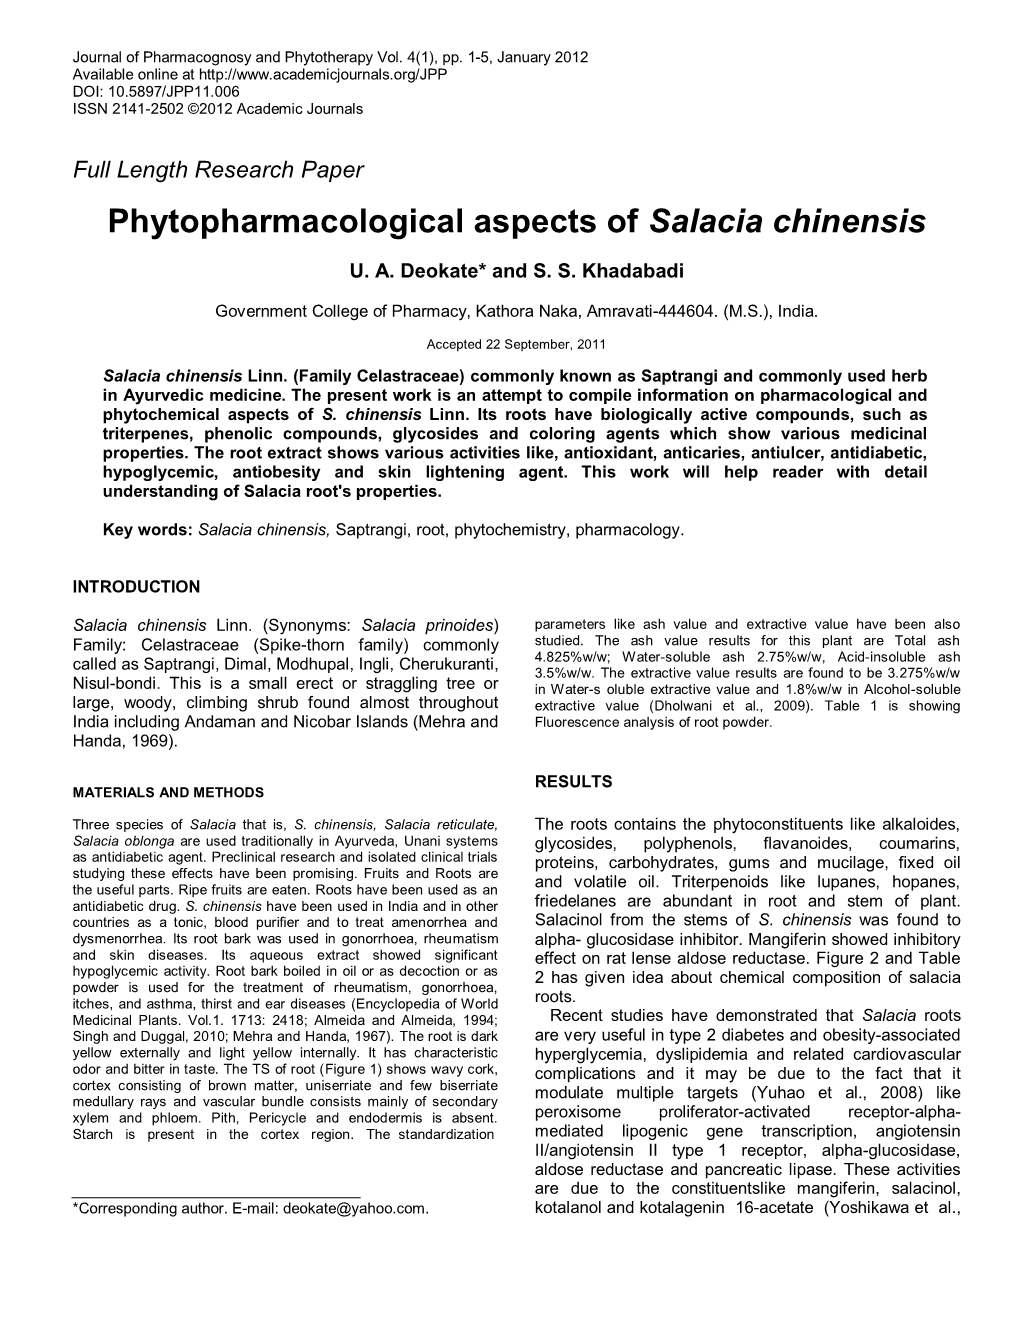 Phytopharmacological Aspects of Salacia Chinensis